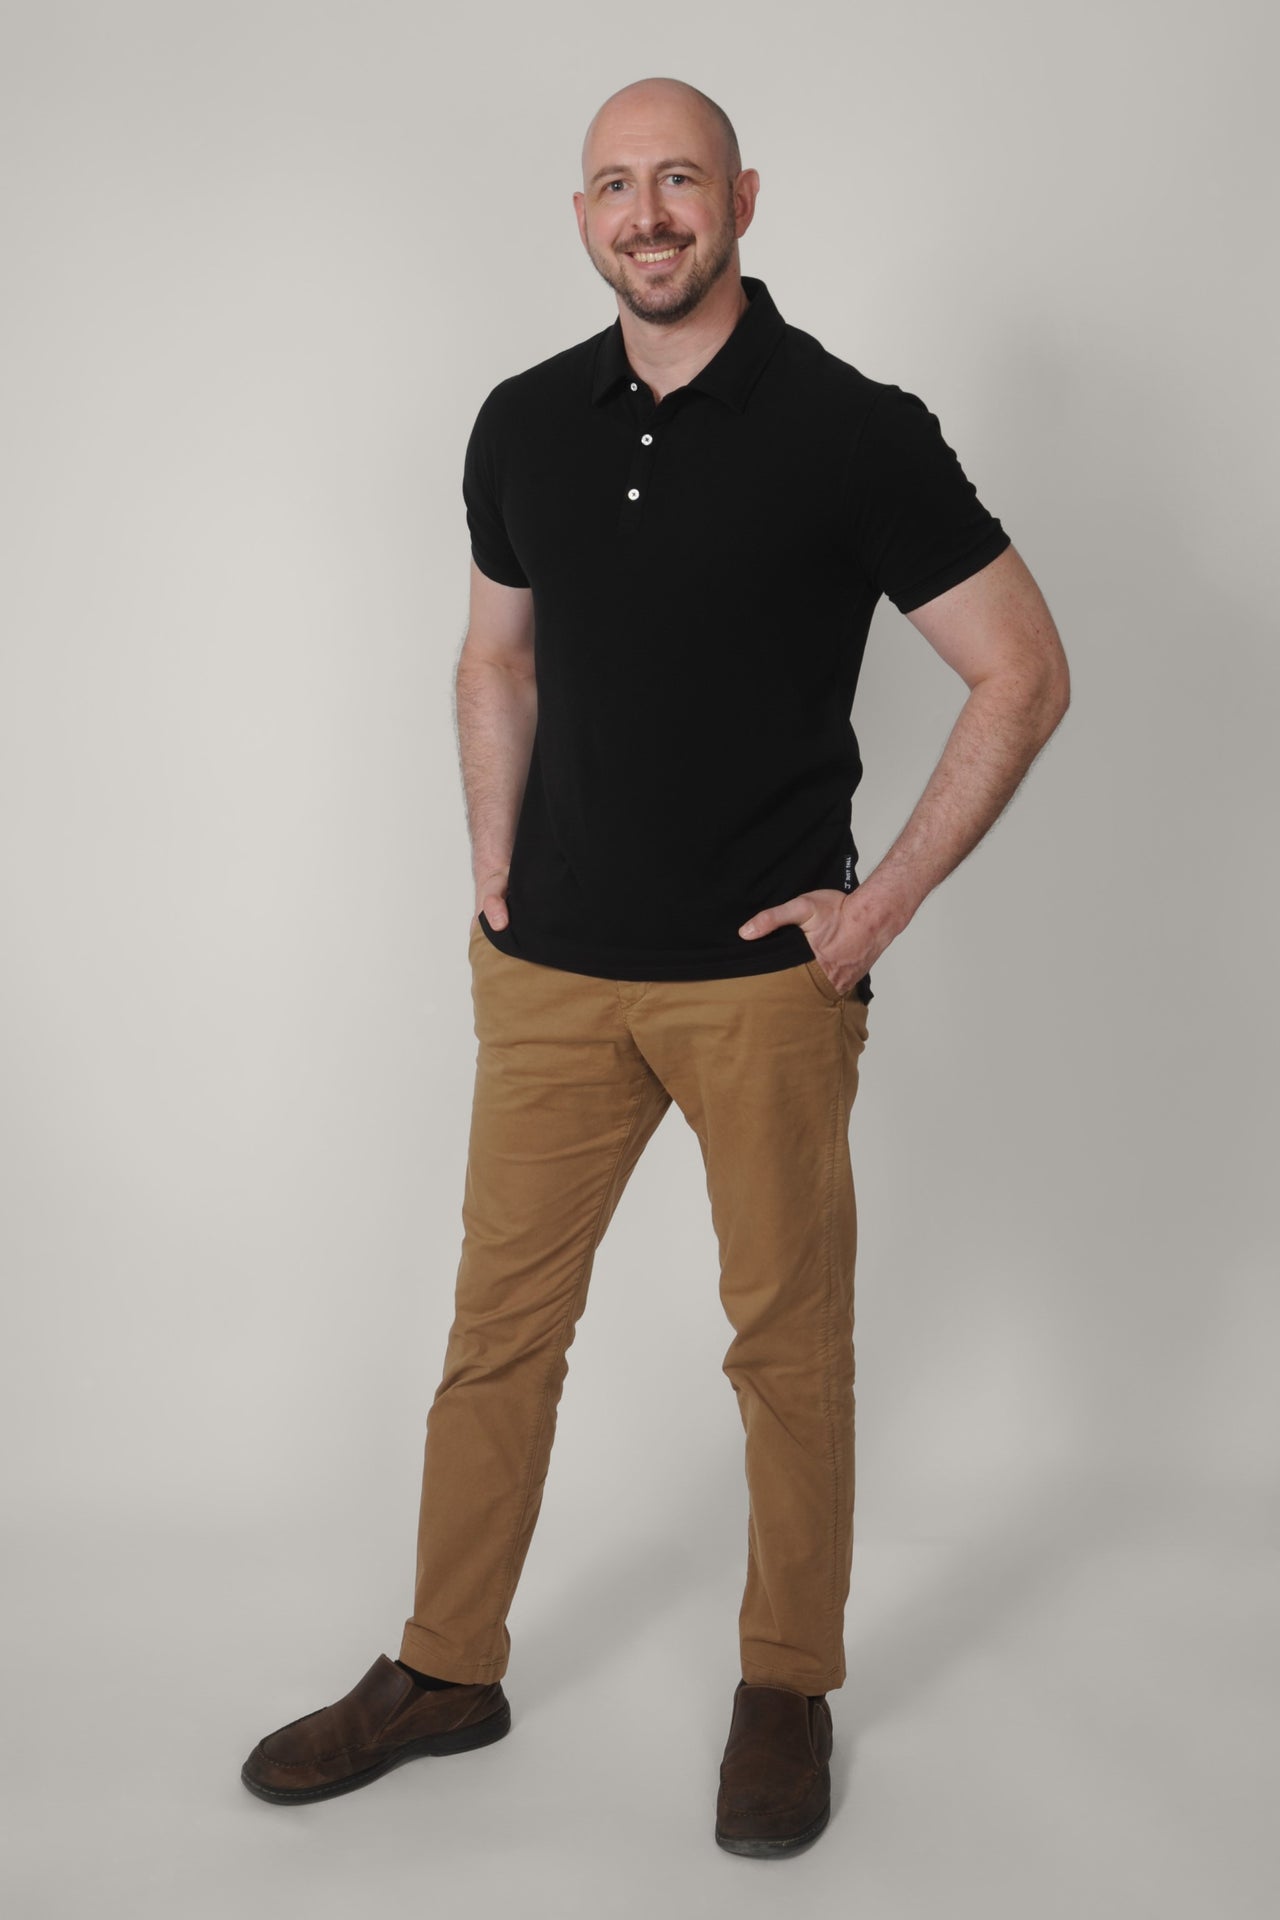 A head to toe shot of a tall skinny guy wearing an XL tall black pique polo shirt, hands in pockets.